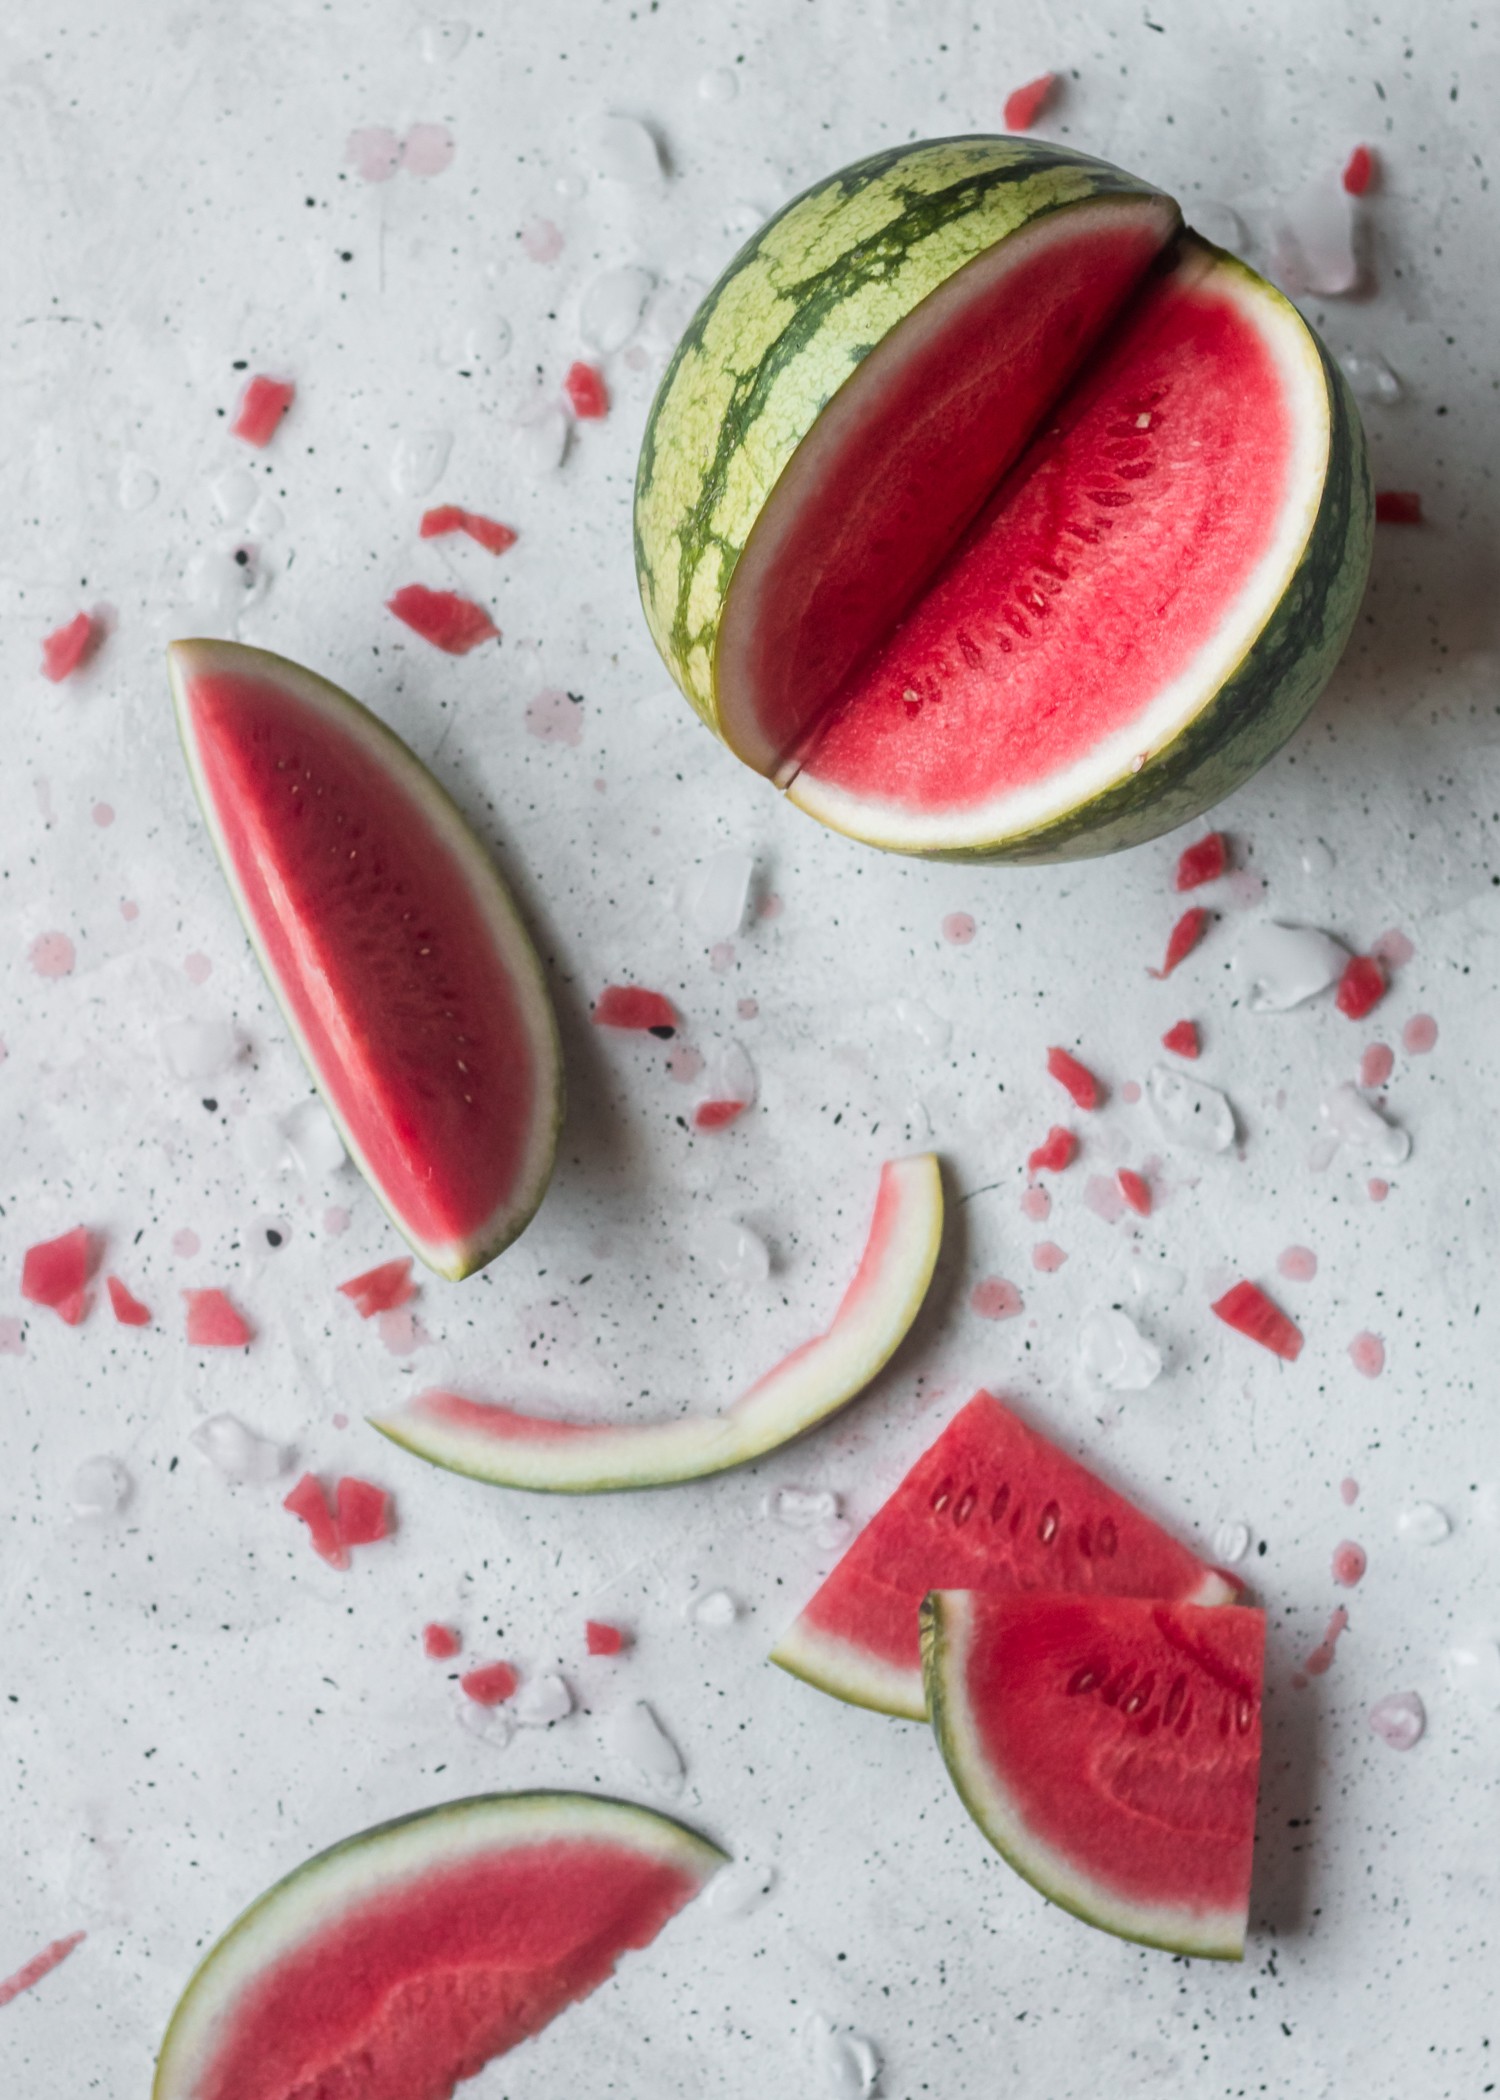 Overhead photo of a sliced watermelon on a grey speckled background, surrounded by watermelon slices, rind, and juice.